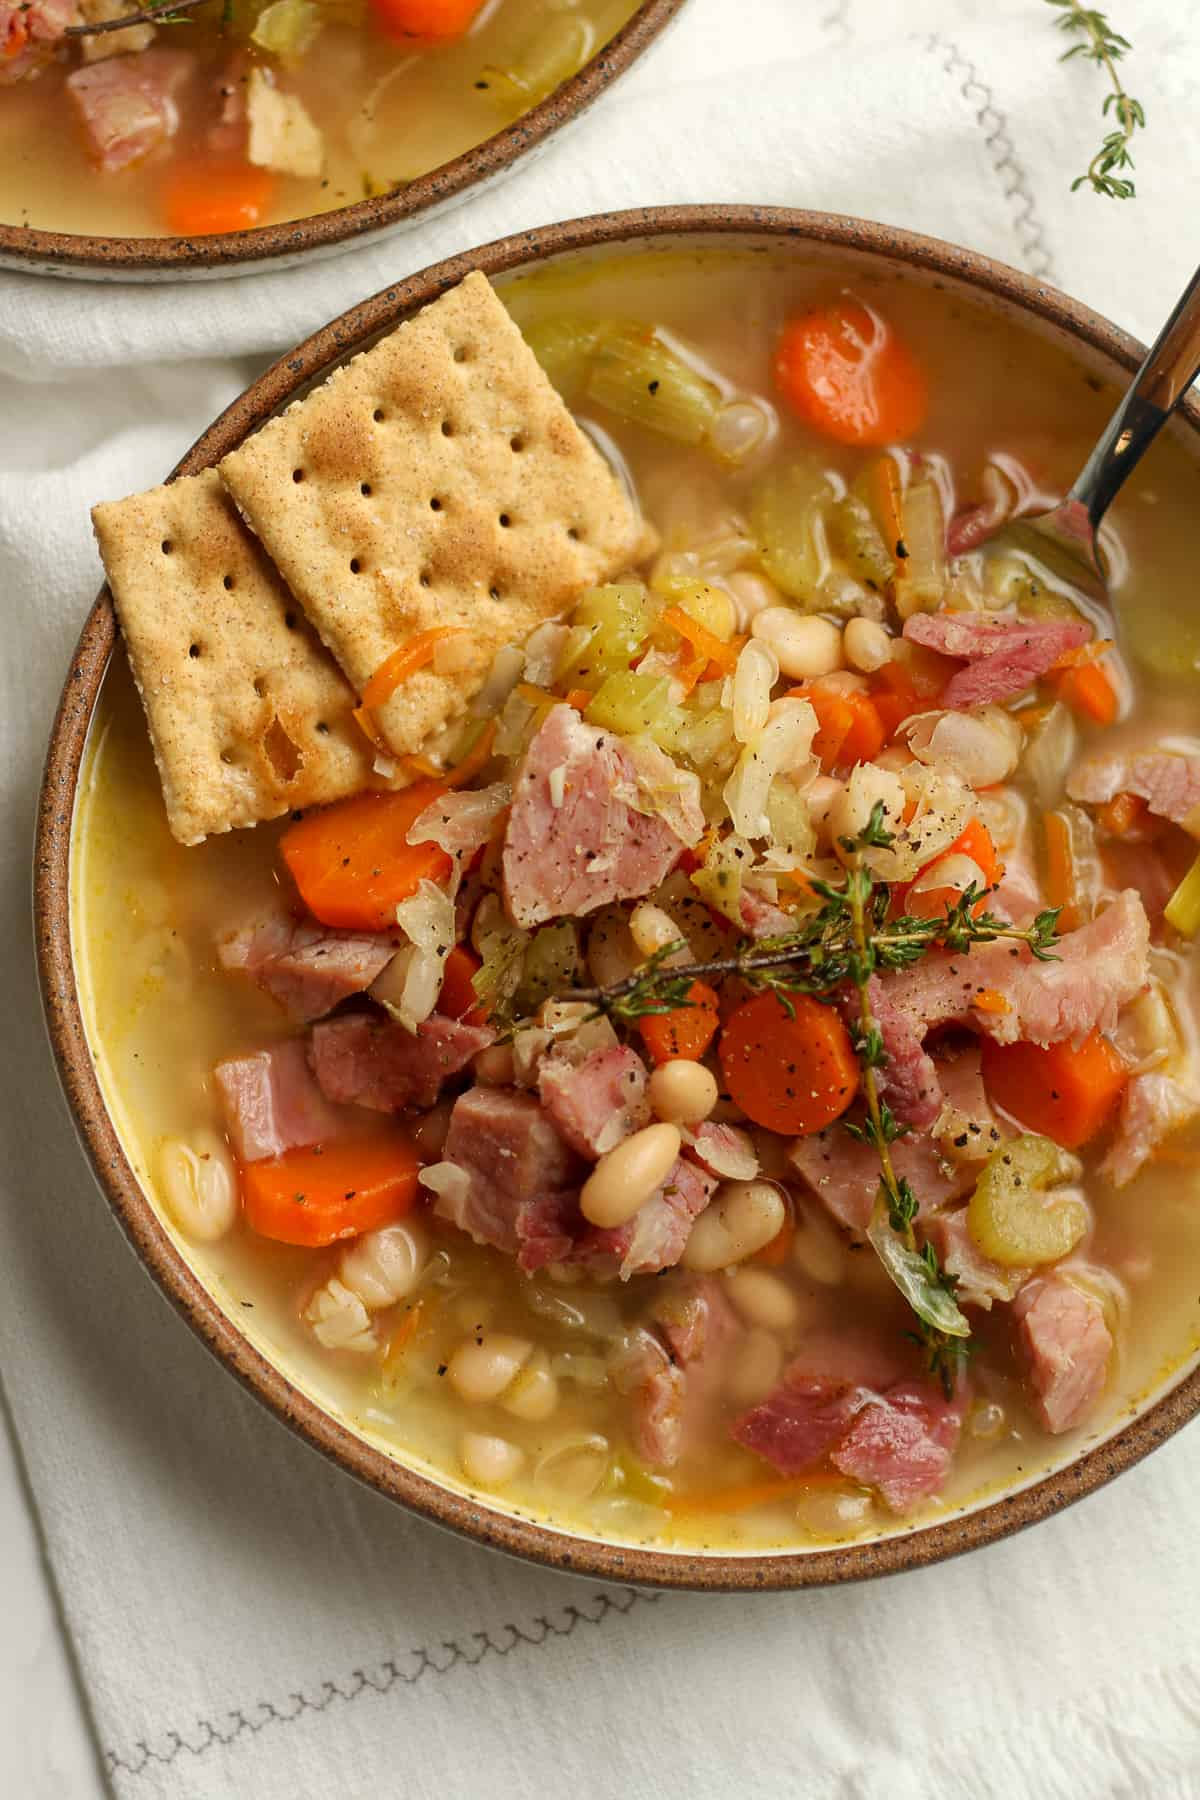 A bowl of the bean and ham soup, with crackers.